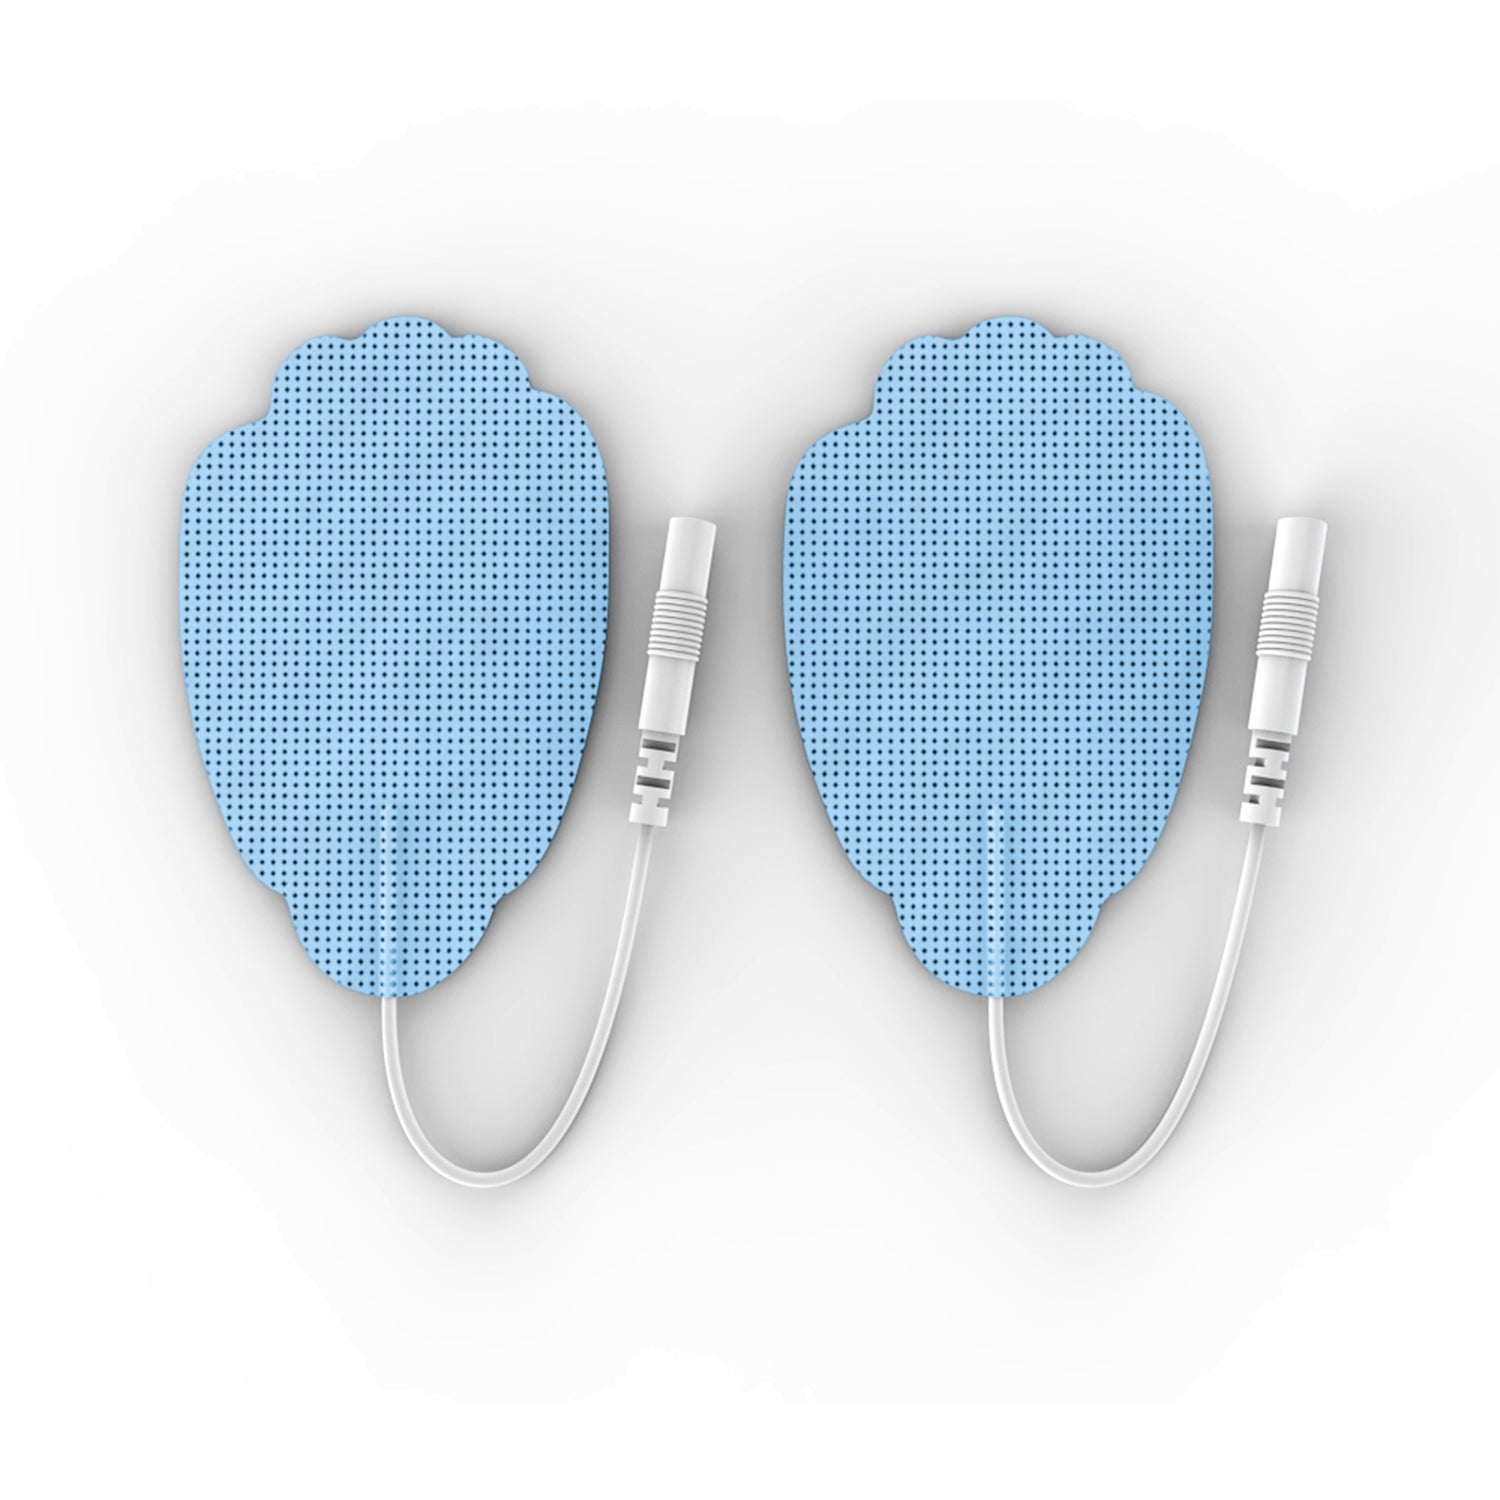 5 Pairs (10 Pcs) Blue Pin-Insert Large Hand-Shaped Pads - HealthmateForever.com